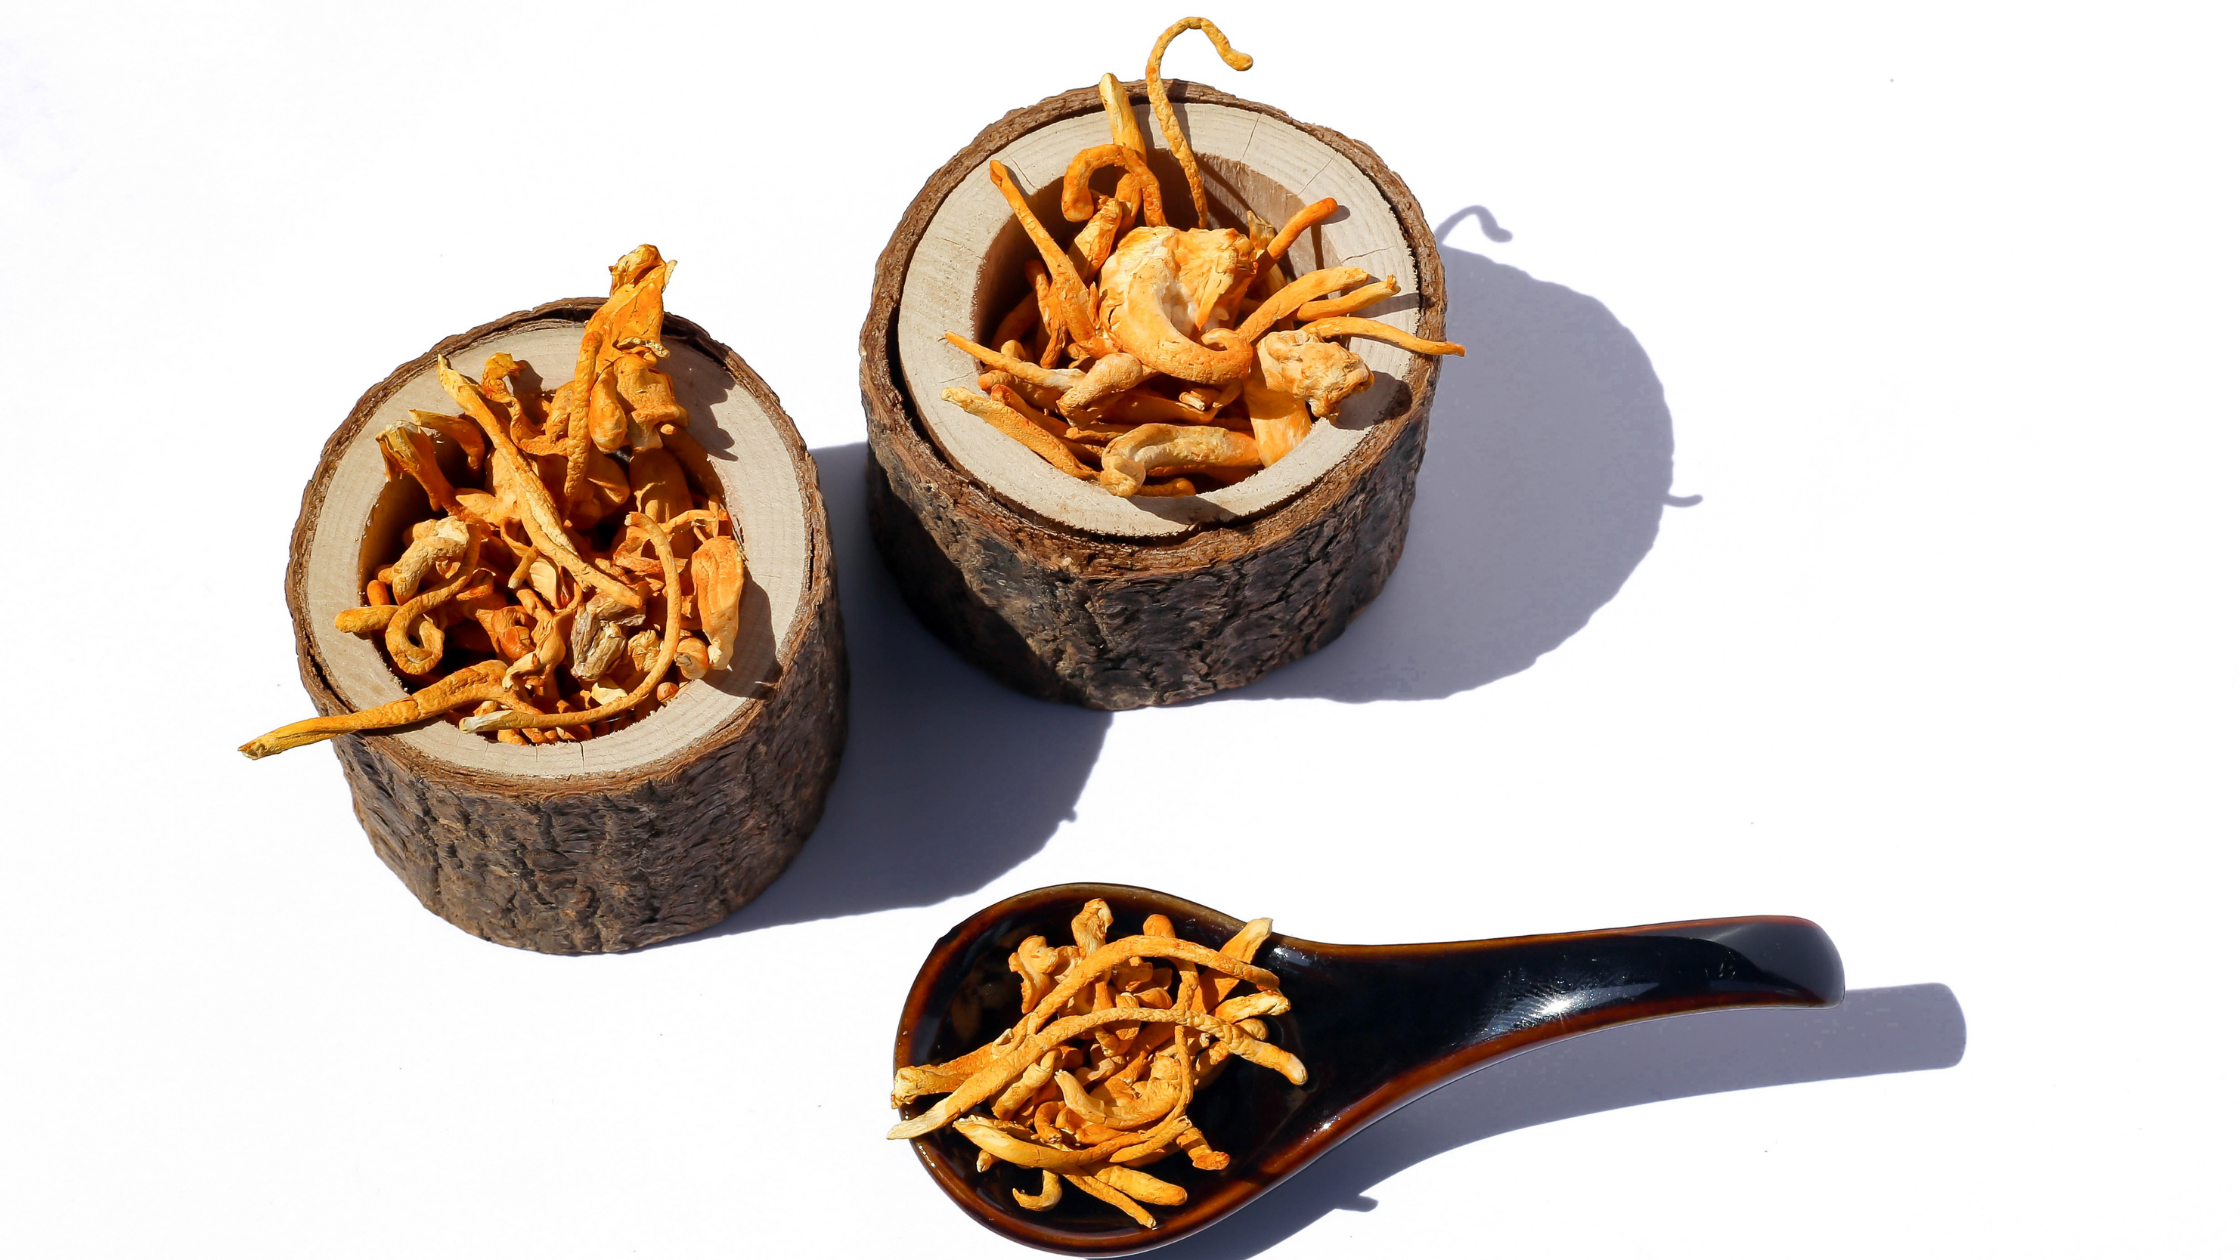 TCM Herb Cordyceps shown inside two tree stumps and a spoon on a table